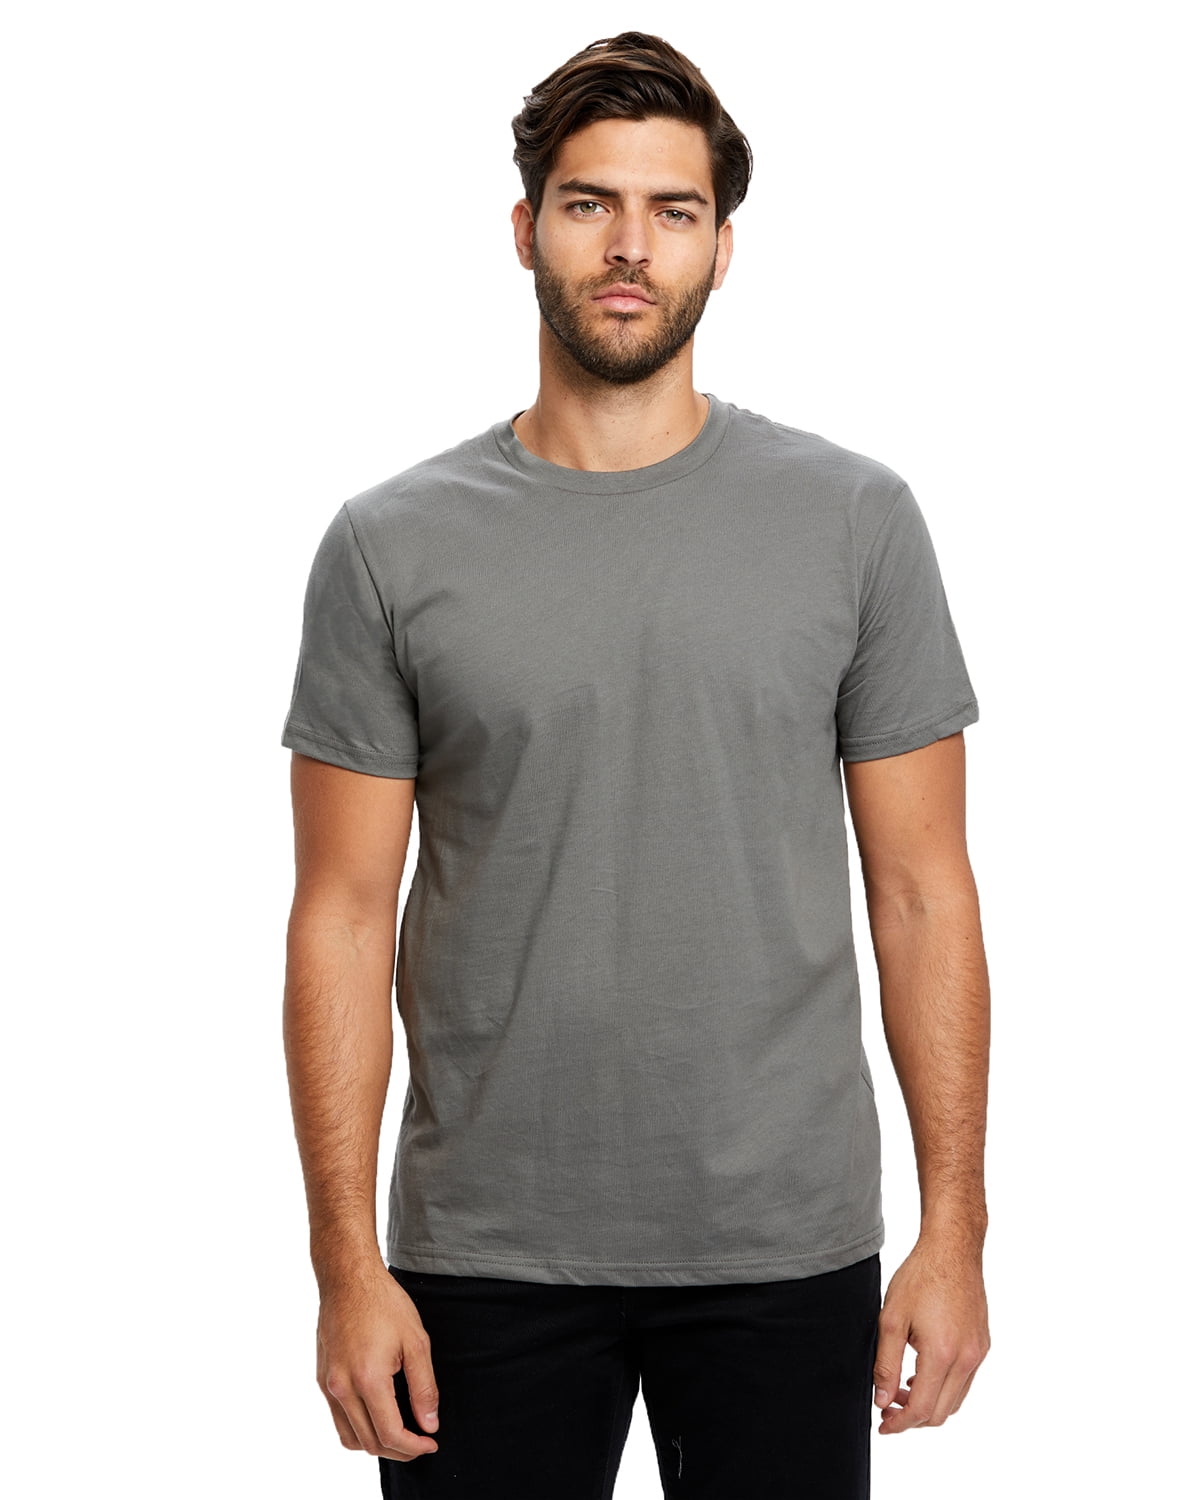 US Blanks - The US Blanks Men's Made in USA Short Sleeve Crew T-Shirt ...